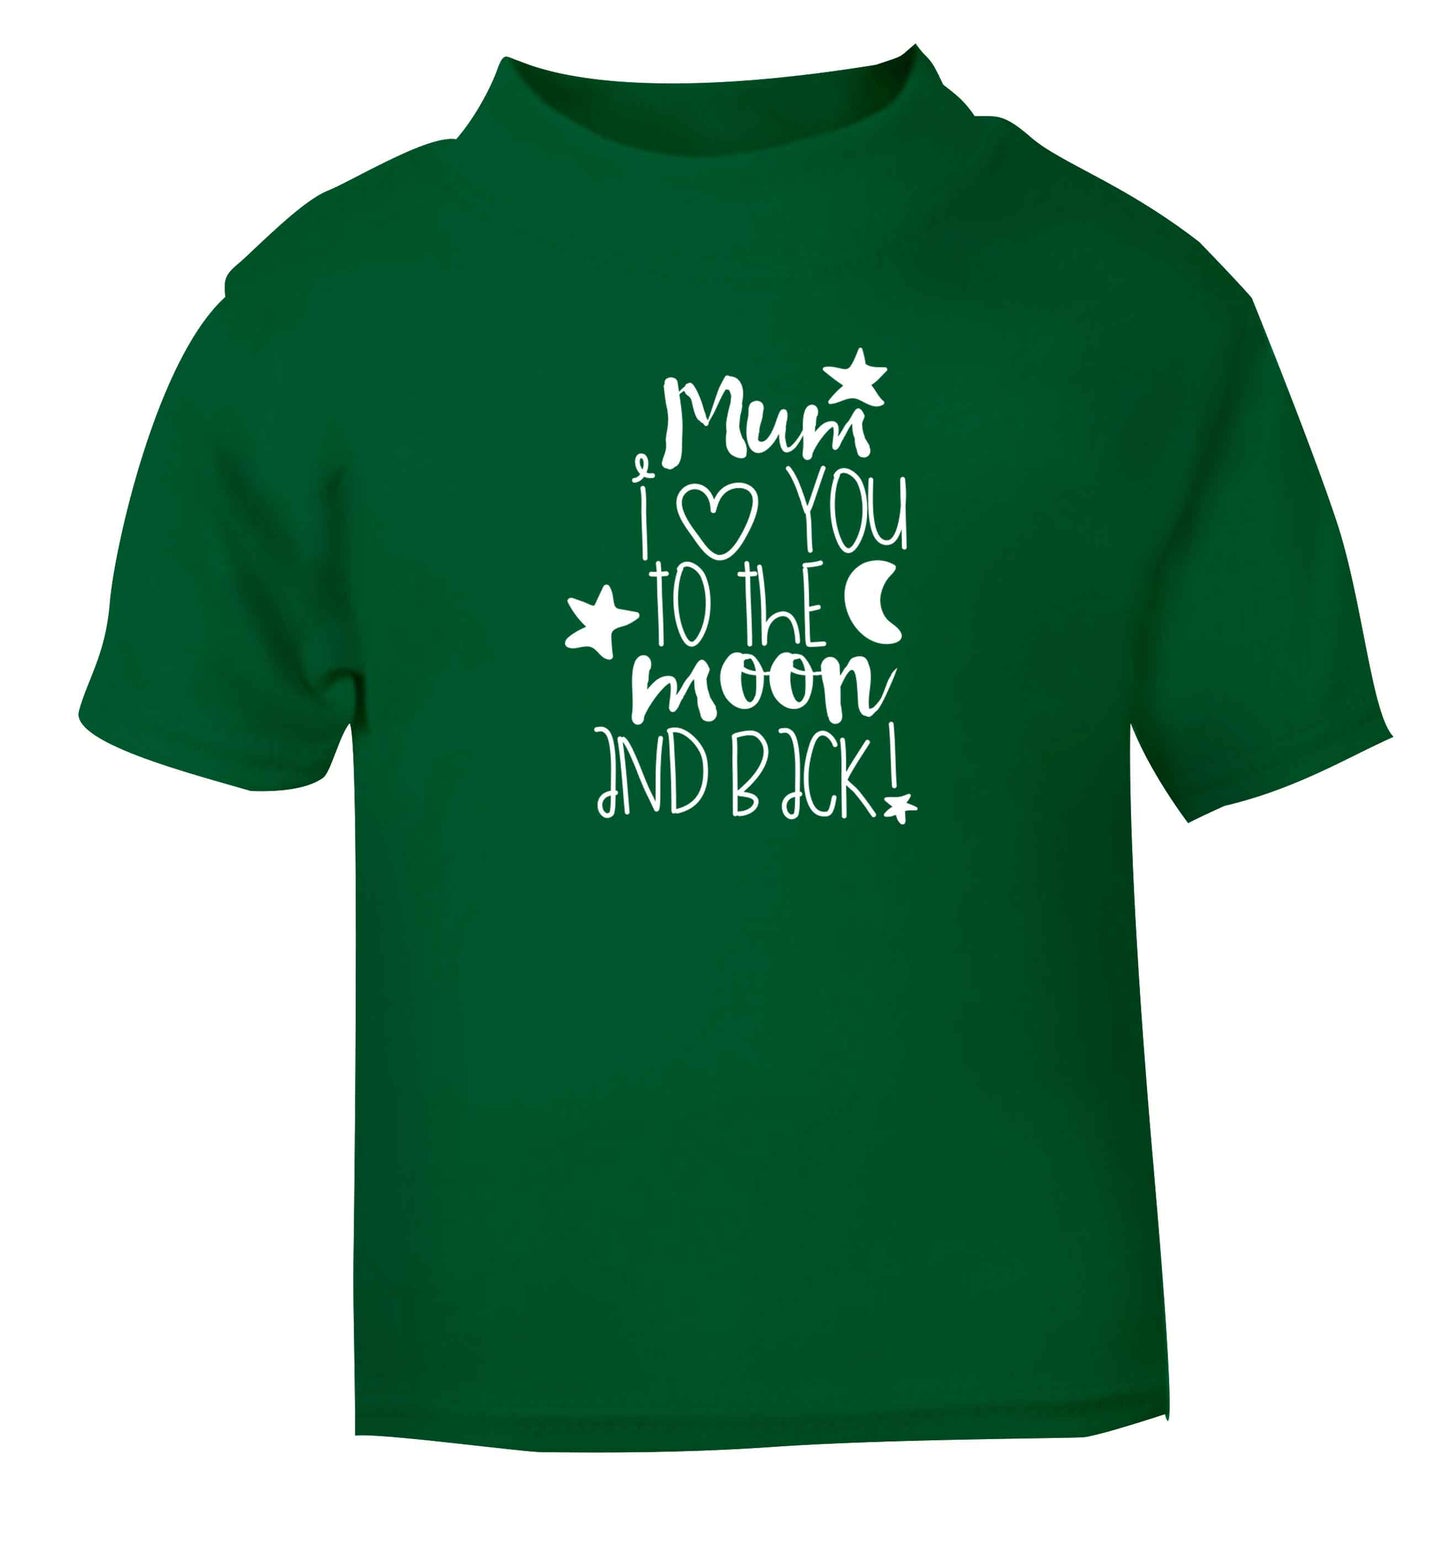 Mum I love you to the moon and back green baby toddler Tshirt 2 Years